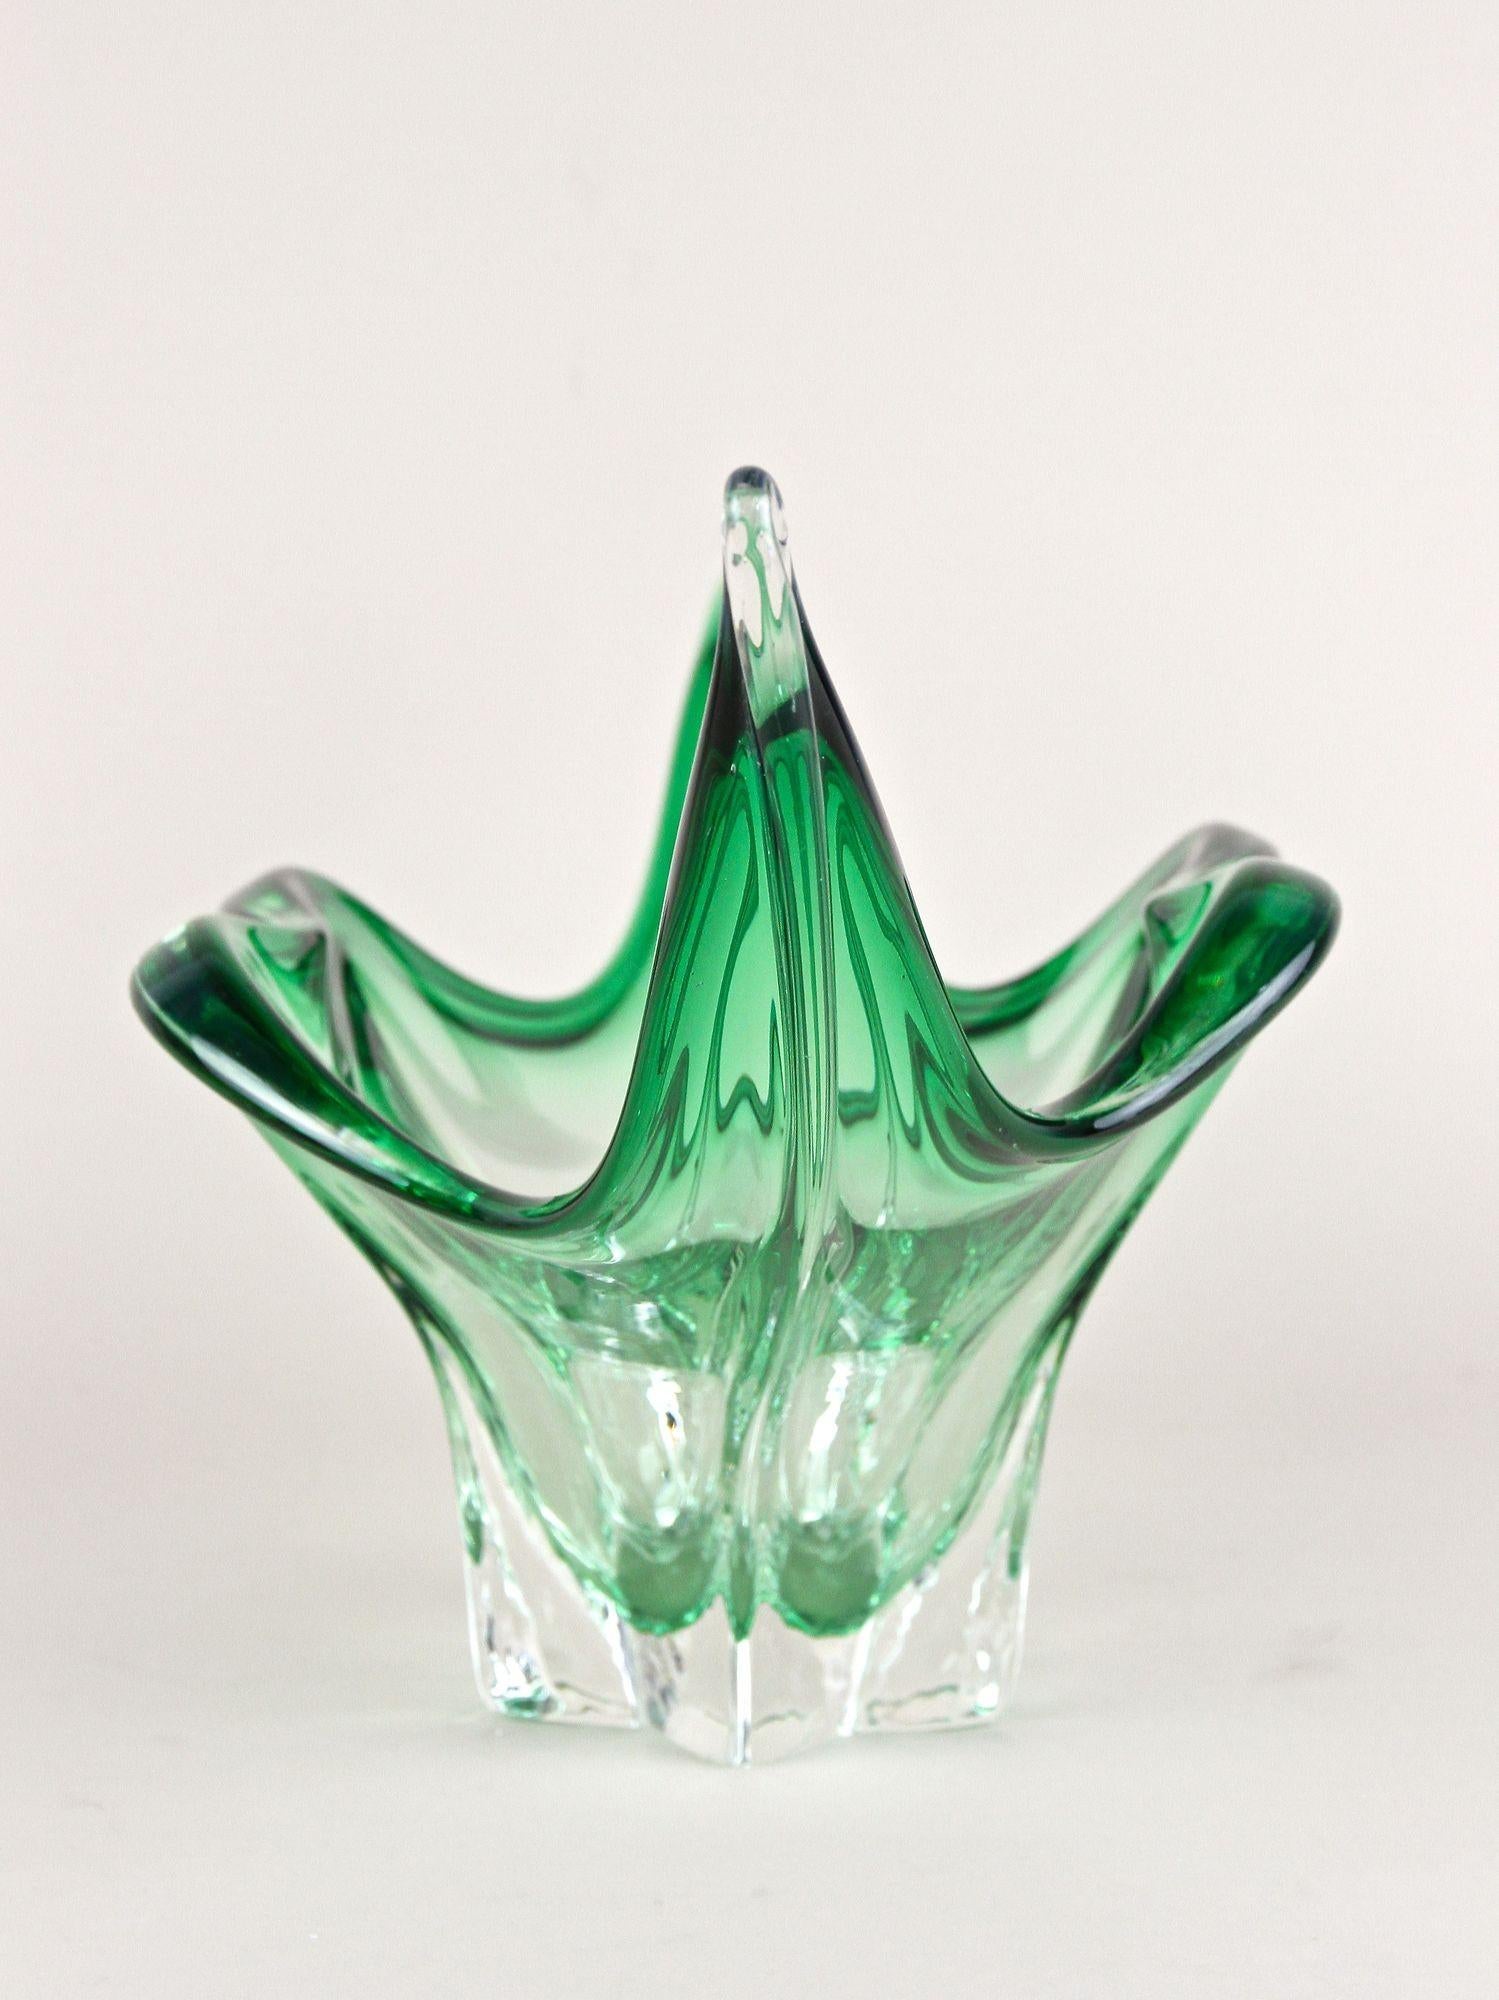 Hand-Crafted Mid Century Modern Murano Glass Bowl, Green/ Clear Tones - Italy ca. 1960 For Sale